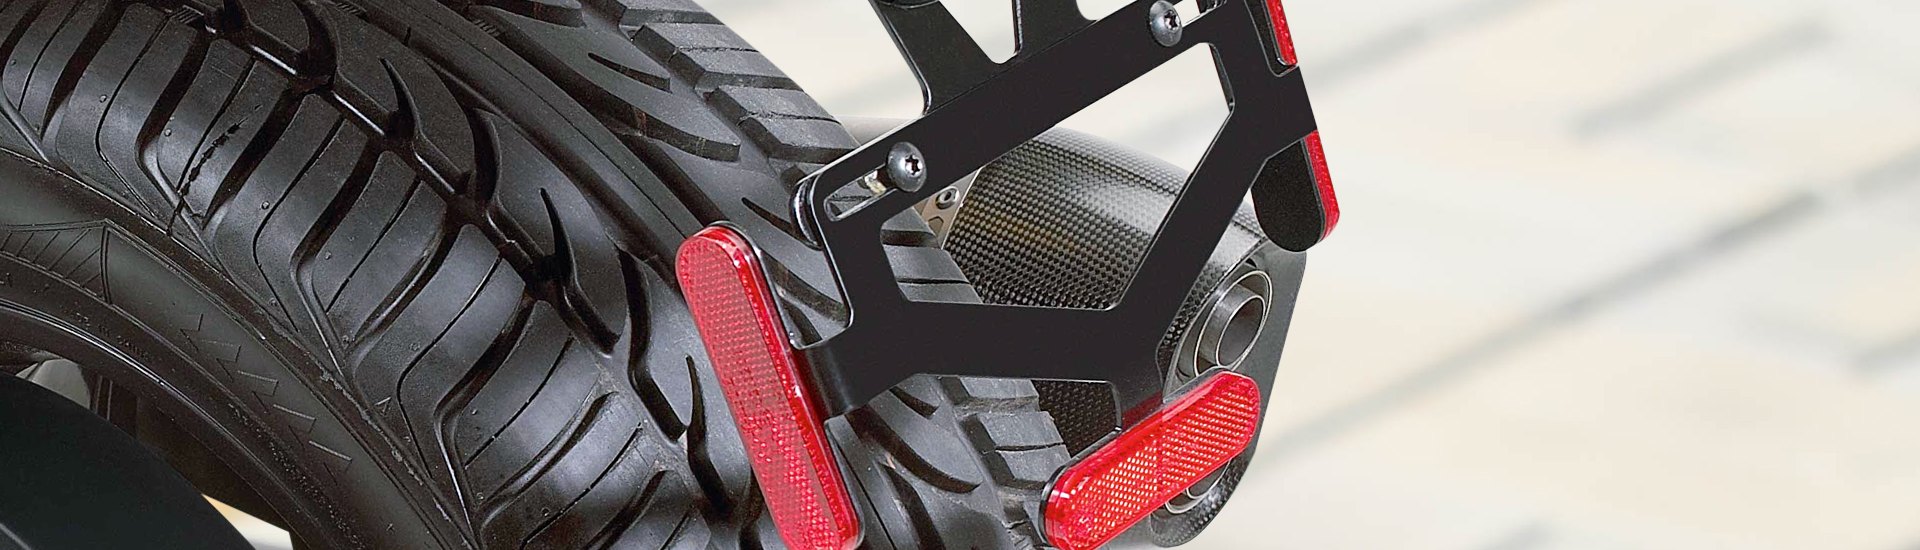 Motorcycle License Plate & Accessories